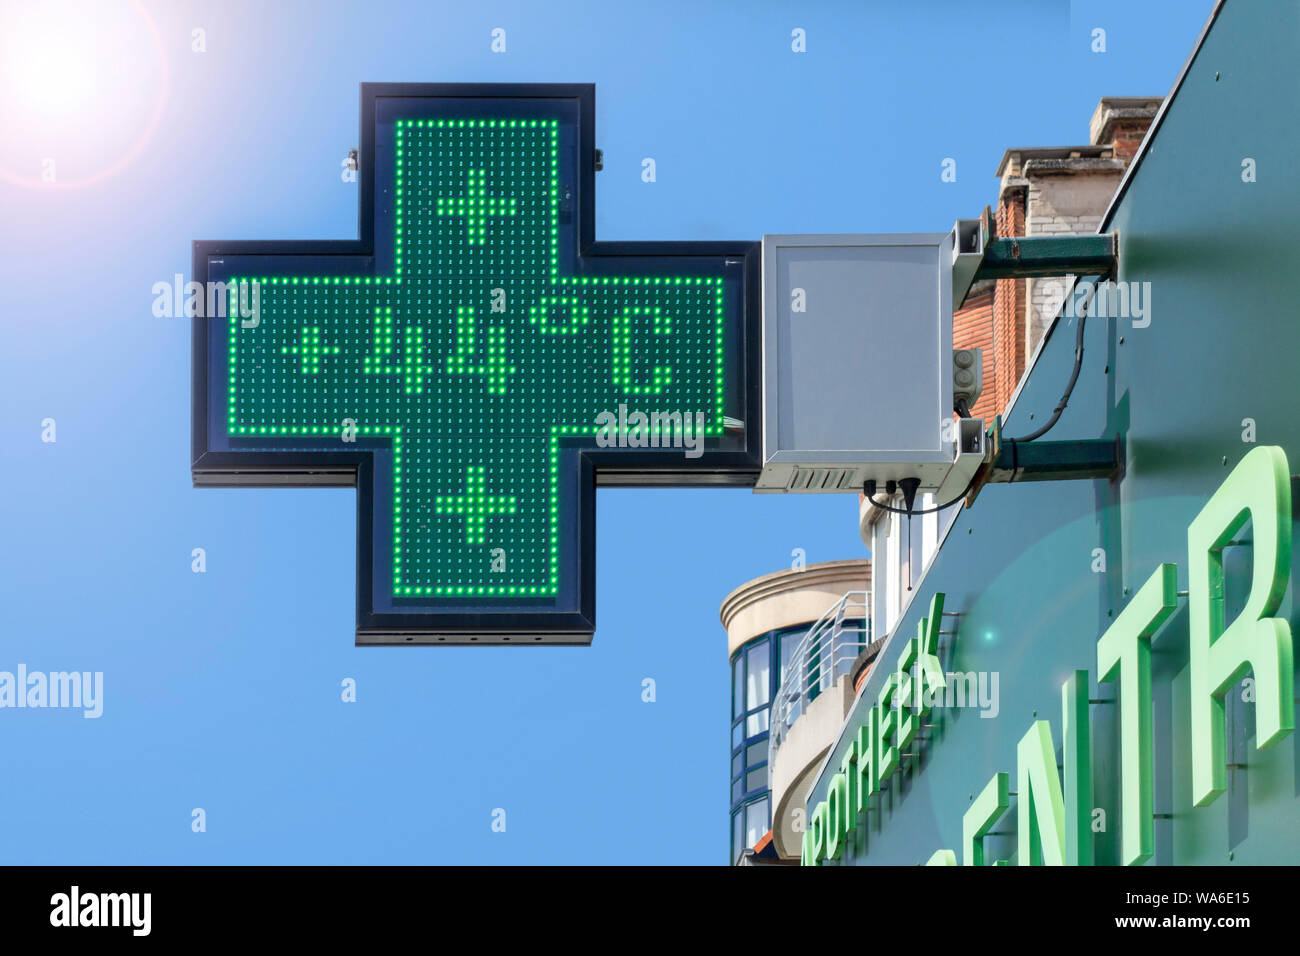 Thermometer in green pharmacy screen sign displays extremely hot temperature of 44 degrees Celsius / 44°C / 44 °C during summer heatwave / heat wave Stock Photo